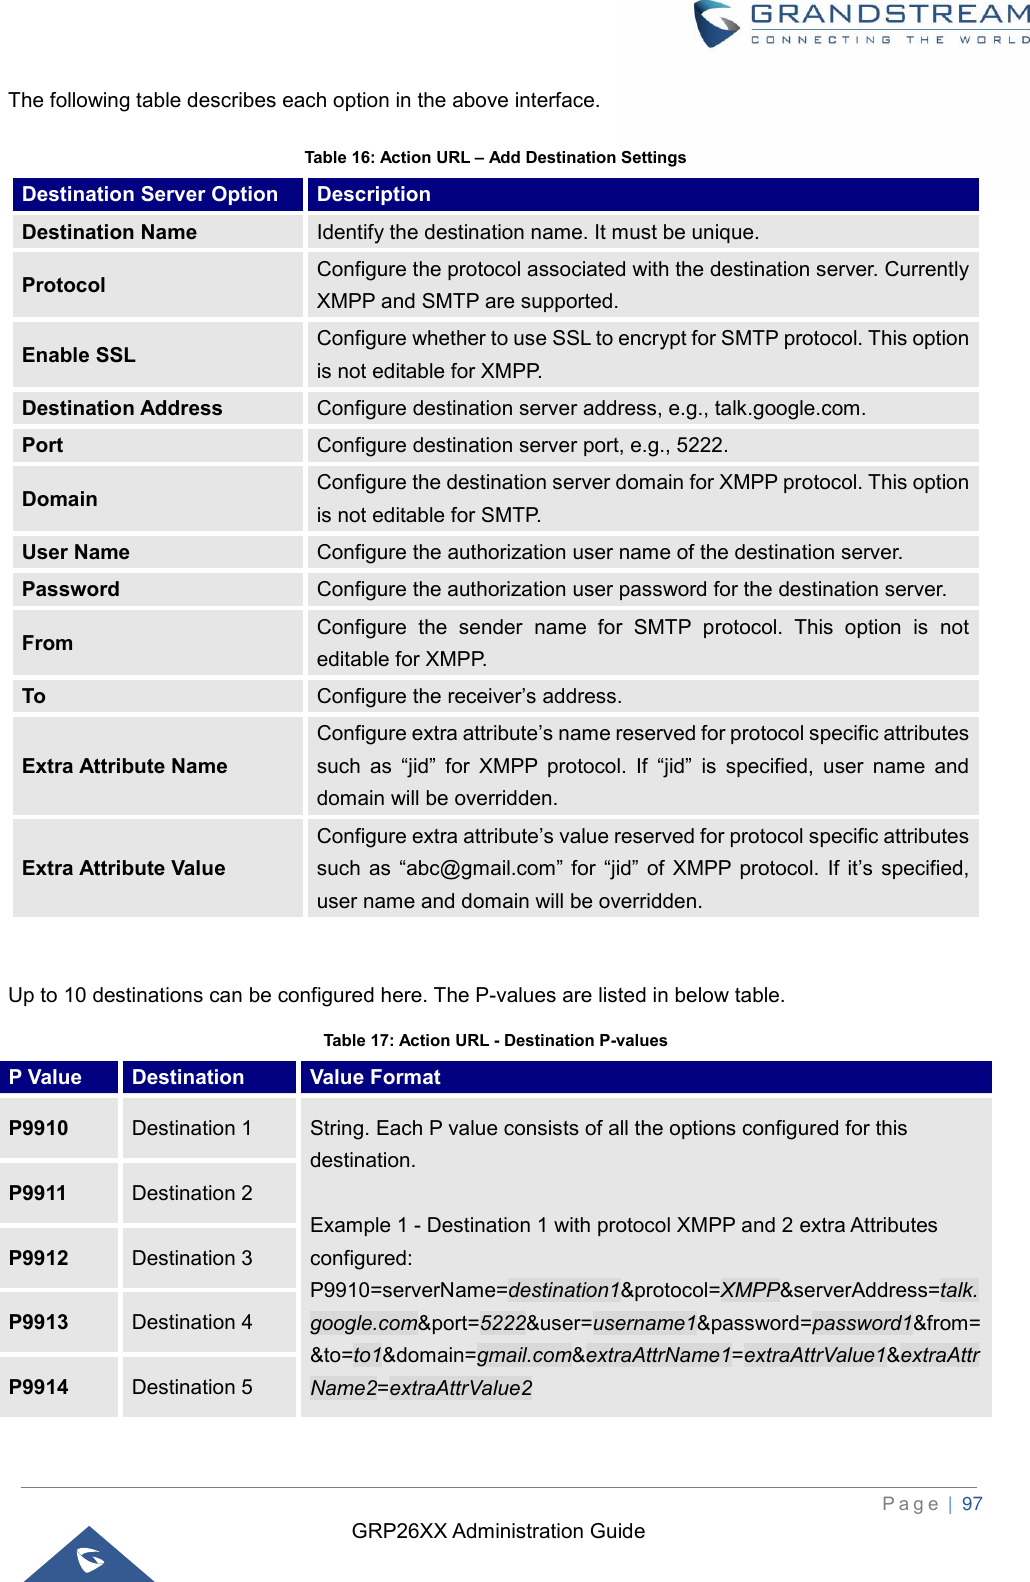 GRP26XX Administration Guide          P a g e  | 97   The following table describes each option in the above interface. Table 16: Action URL – Add Destination Settings Destination Server Option Description Destination Name Identify the destination name. It must be unique. Protocol Configure the protocol associated with the destination server. Currently XMPP and SMTP are supported. Enable SSL Configure whether to use SSL to encrypt for SMTP protocol. This option is not editable for XMPP. Destination Address Configure destination server address, e.g., talk.google.com. Port Configure destination server port, e.g., 5222. Domain Configure the destination server domain for XMPP protocol. This option is not editable for SMTP. User Name Configure the authorization user name of the destination server. Password Configure the authorization user password for the destination server. From Configure  the  sender  name  for  SMTP  protocol.  This  option  is  not editable for XMPP. To Configure the receiver’s address. Extra Attribute Name Configure extra attribute’s name reserved for protocol specific attributes such  as  “jid”  for  XMPP  protocol.  If  “jid”  is  specified,  user  name  and domain will be overridden. Extra Attribute Value Configure extra attribute’s value reserved for protocol specific attributes such  as  “abc@gmail.com”  for  “jid” of  XMPP protocol.  If it’s  specified, user name and domain will be overridden.  Up to 10 destinations can be configured here. The P-values are listed in below table. Table 17: Action URL - Destination P-values P Value Destination Value Format P9910 Destination 1 String. Each P value consists of all the options configured for this destination.  Example 1 - Destination 1 with protocol XMPP and 2 extra Attributes configured: P9910=serverName=destination1&amp;protocol=XMPP&amp;serverAddress=talk.google.com&amp;port=5222&amp;user=username1&amp;password=password1&amp;from=&amp;to=to1&amp;domain=gmail.com&amp;extraAttrName1=extraAttrValue1&amp;extraAttrName2=extraAttrValue2 P9911 Destination 2 P9912 Destination 3 P9913 Destination 4 P9914 Destination 5 